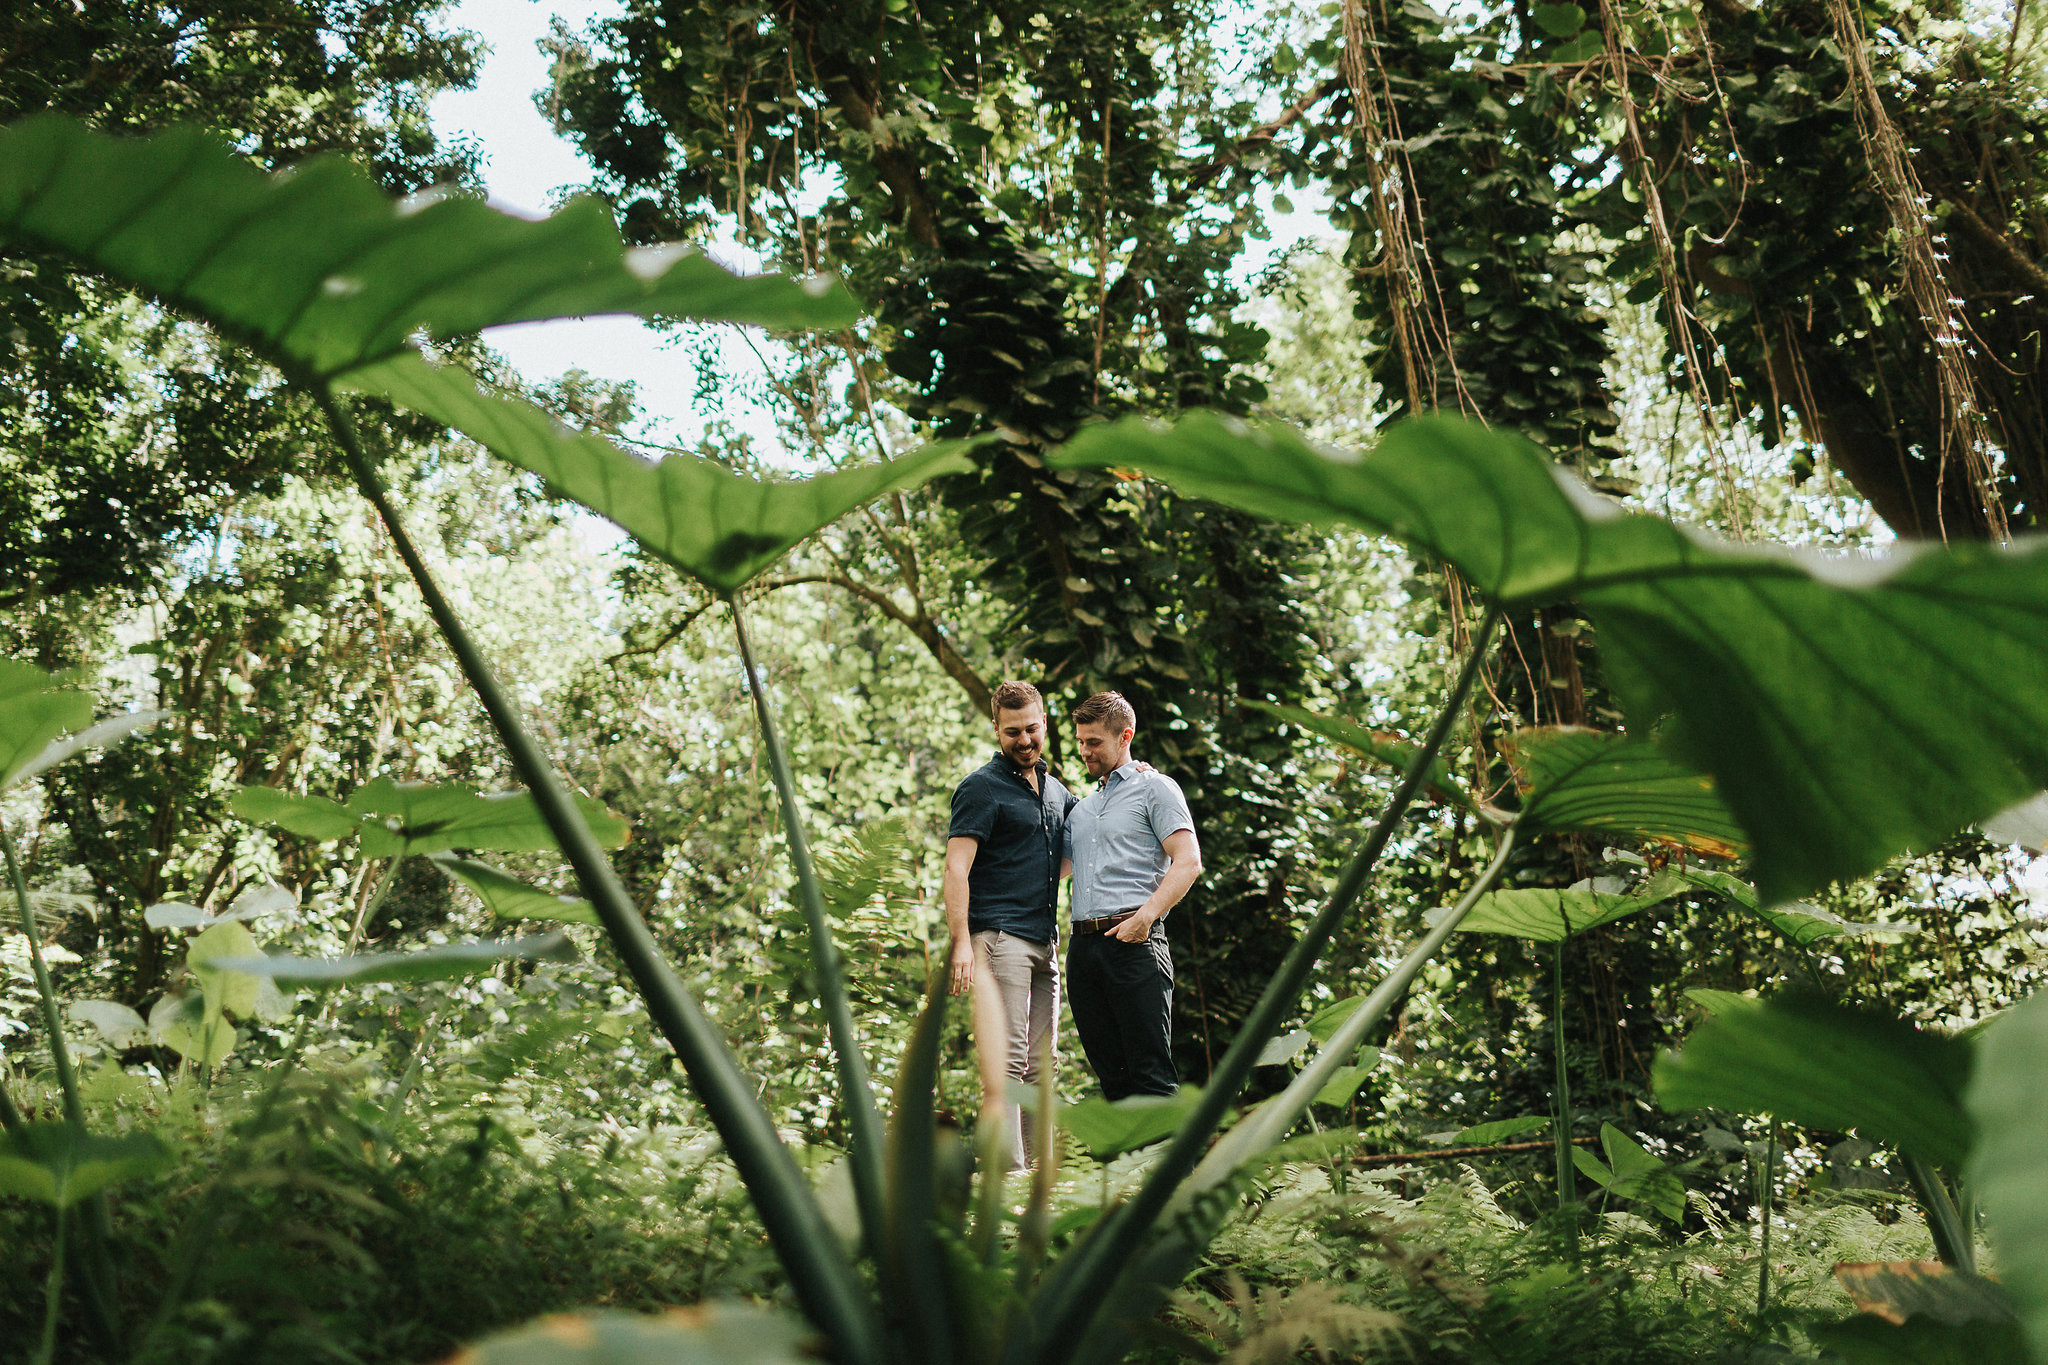 A couple is framed by tropical plants in a forest on Kauai, Hawaii